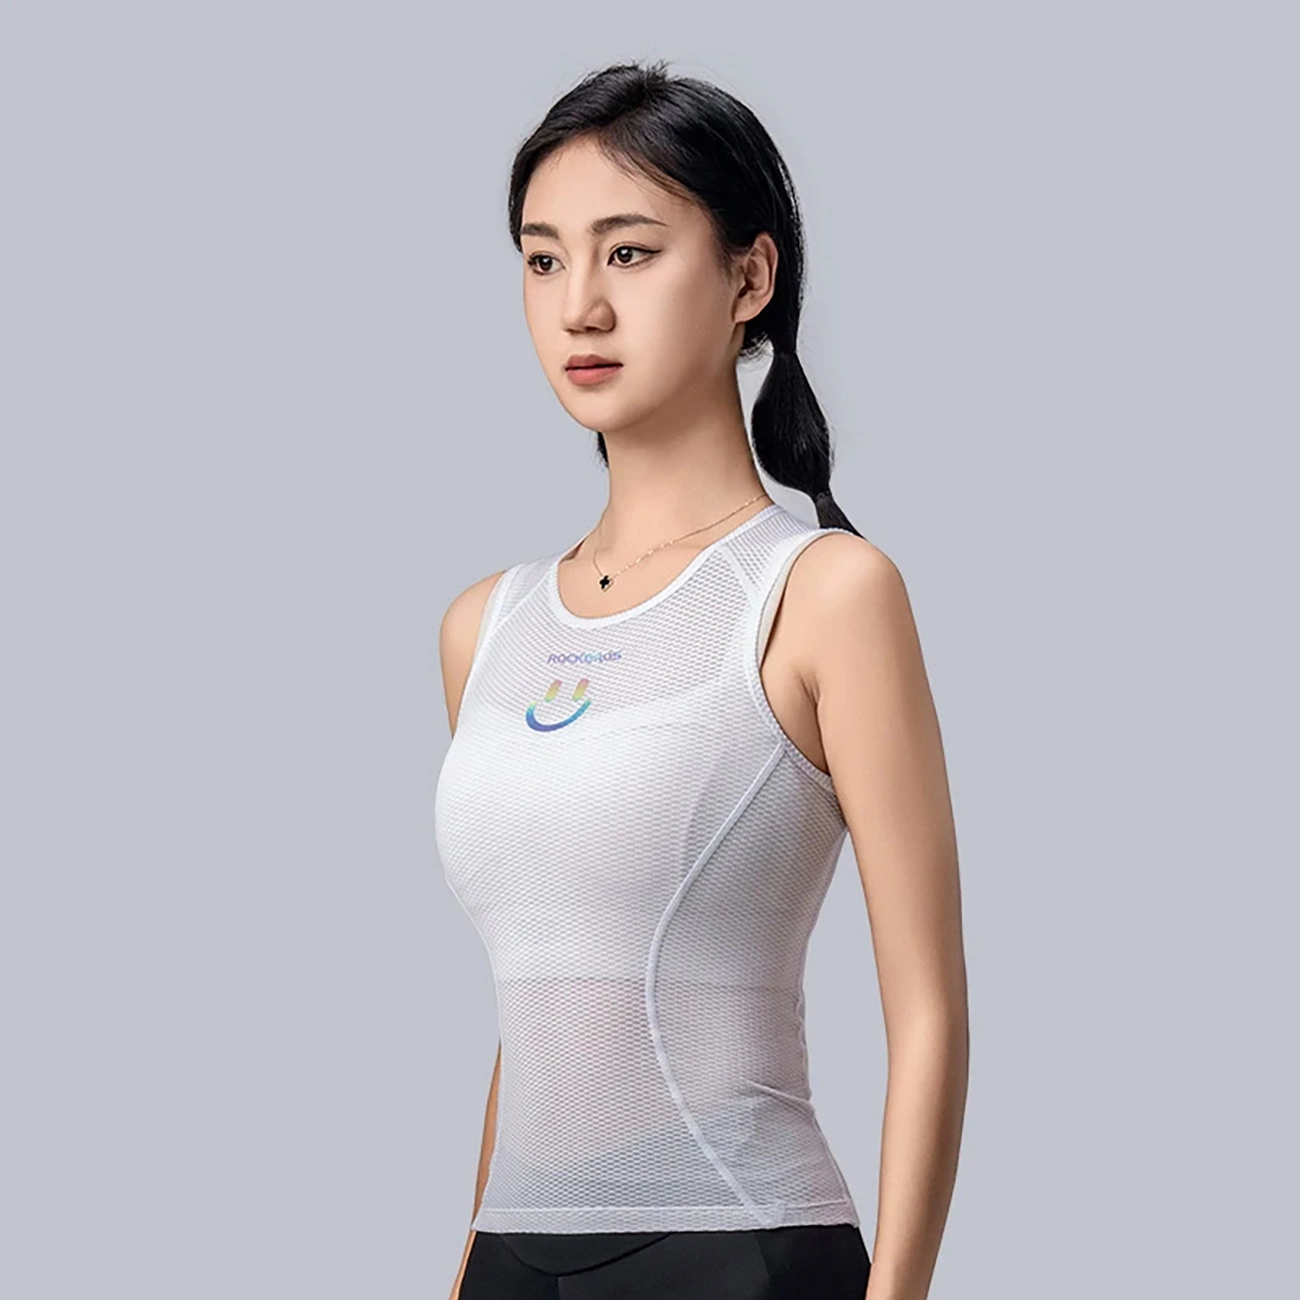 Woman wearing Rockbros YDBX001 cycling vest standing sideways to the camera